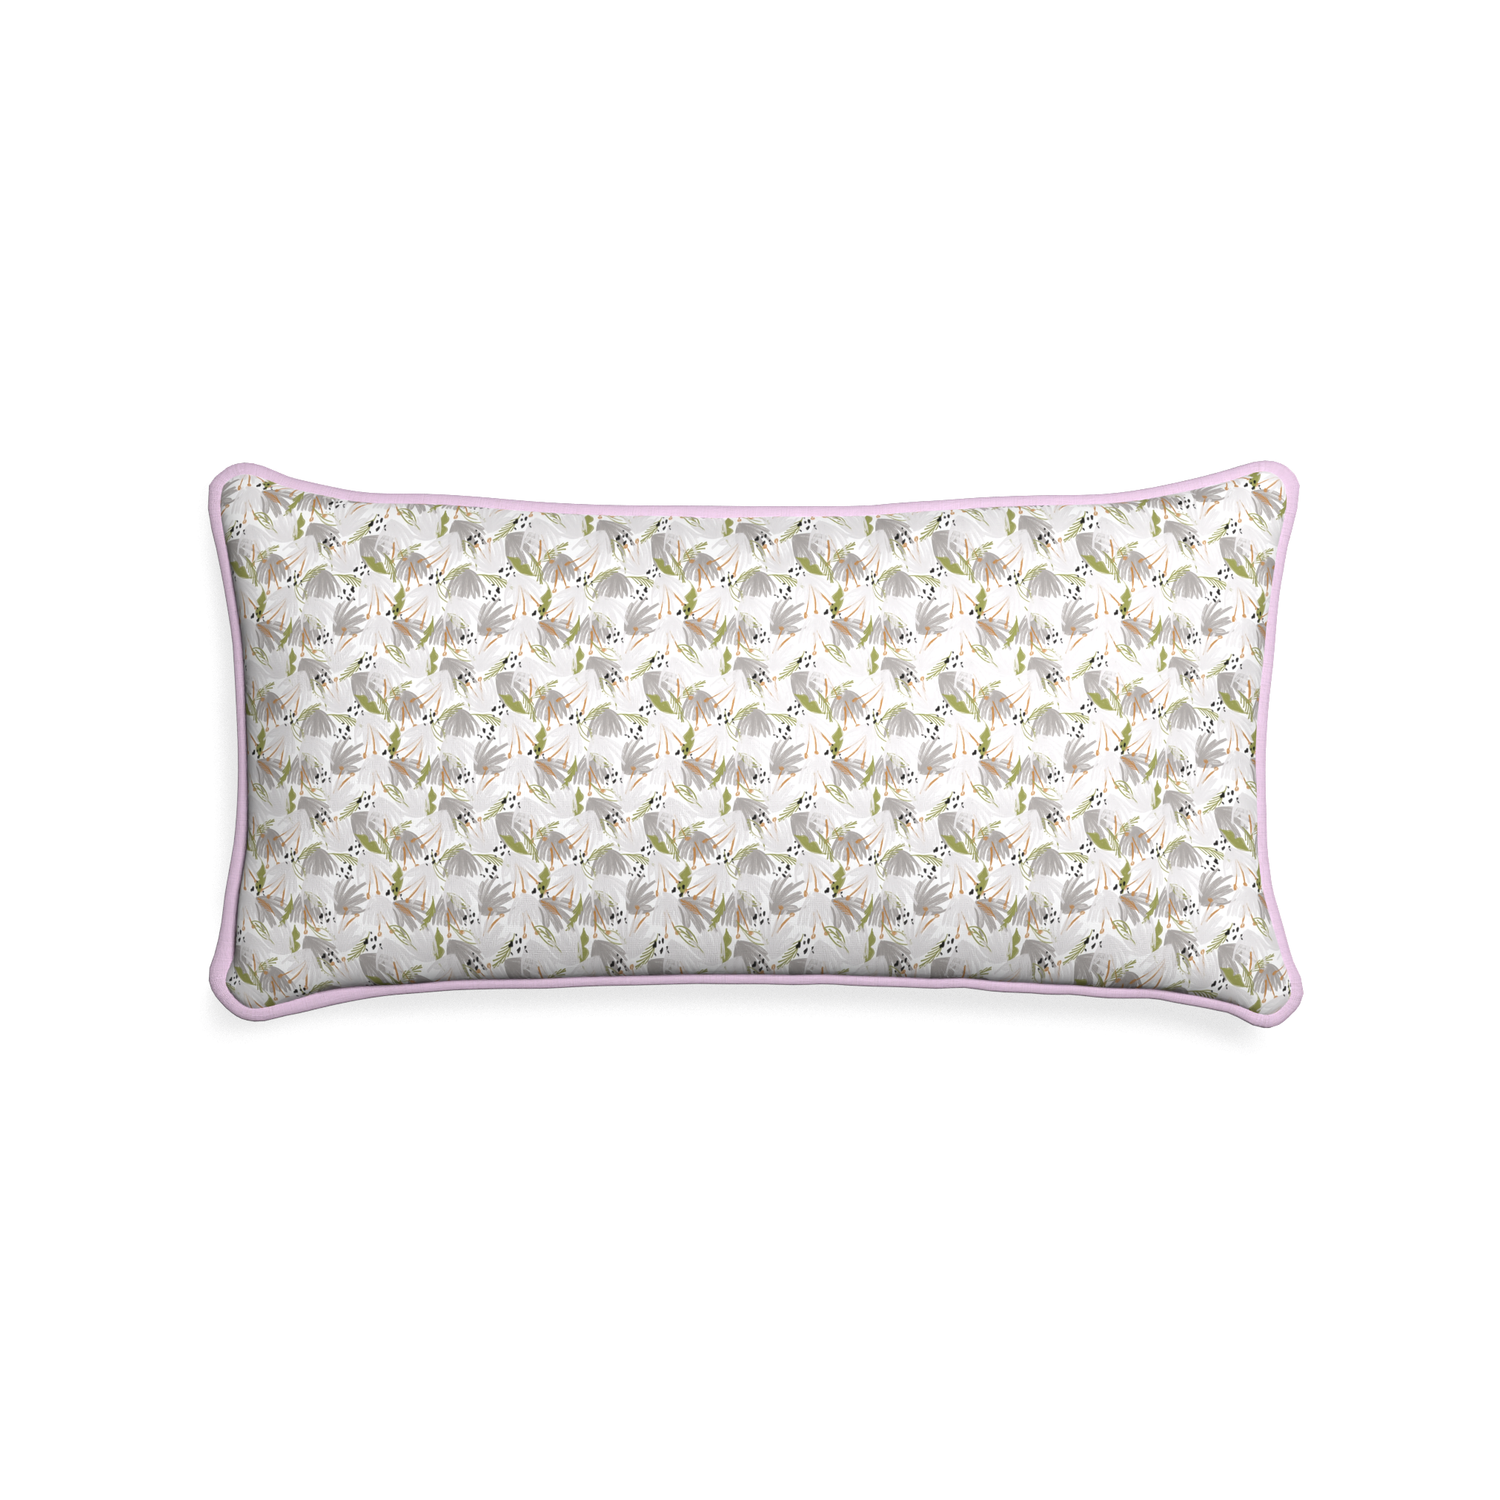 Midi-lumbar eden grey custom grey floralpillow with l piping on white background